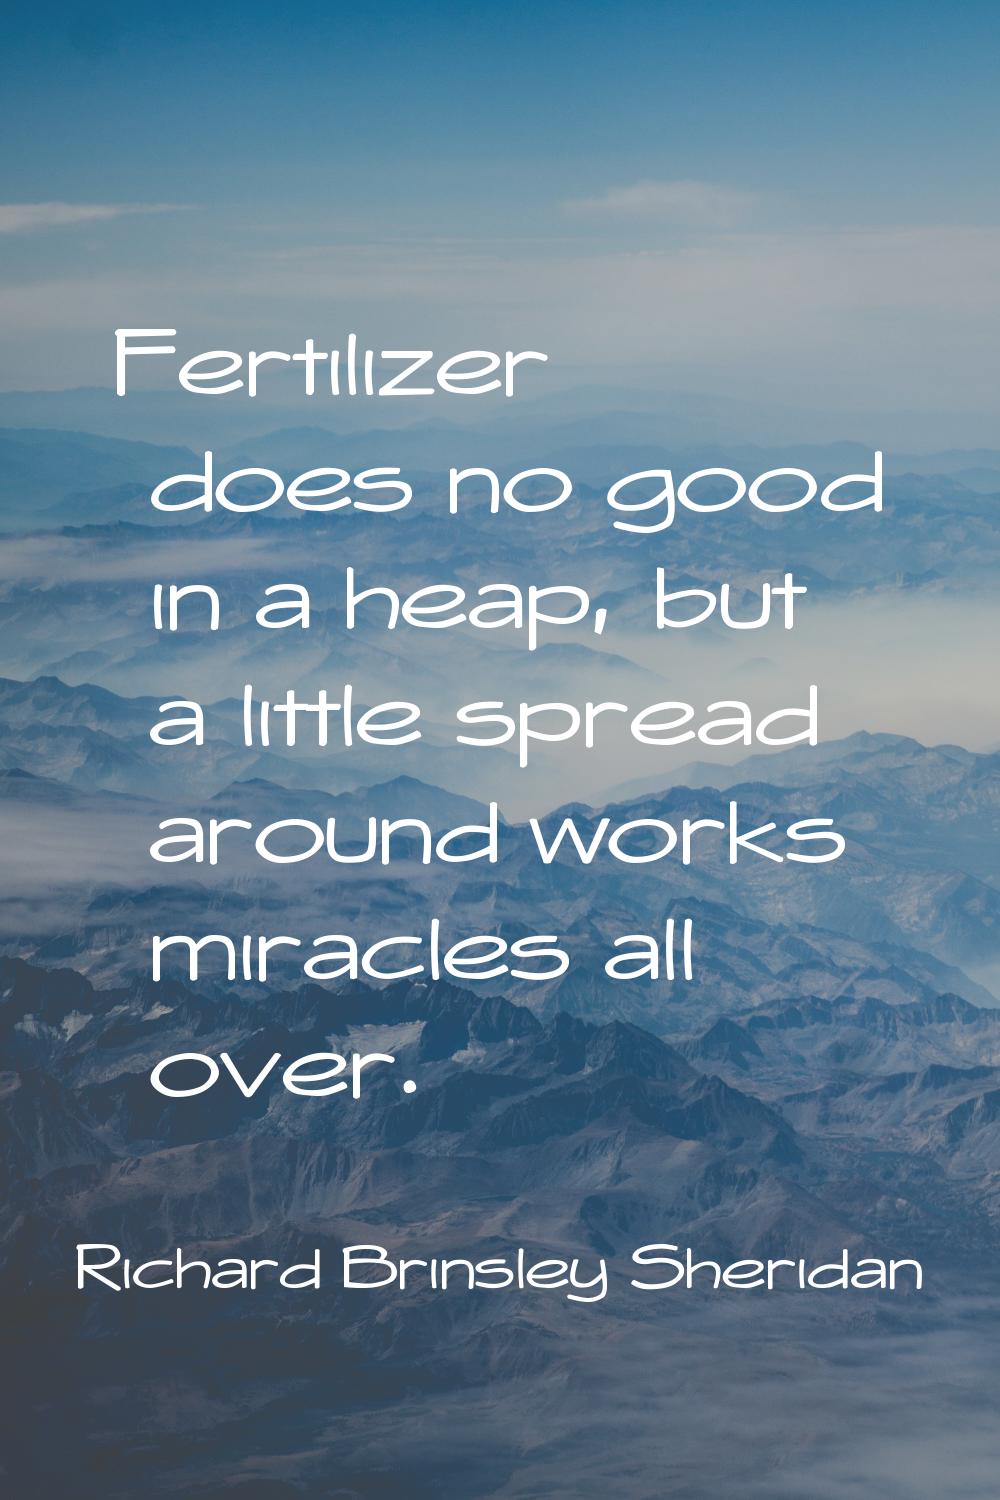 Fertilizer does no good in a heap, but a little spread around works miracles all over.